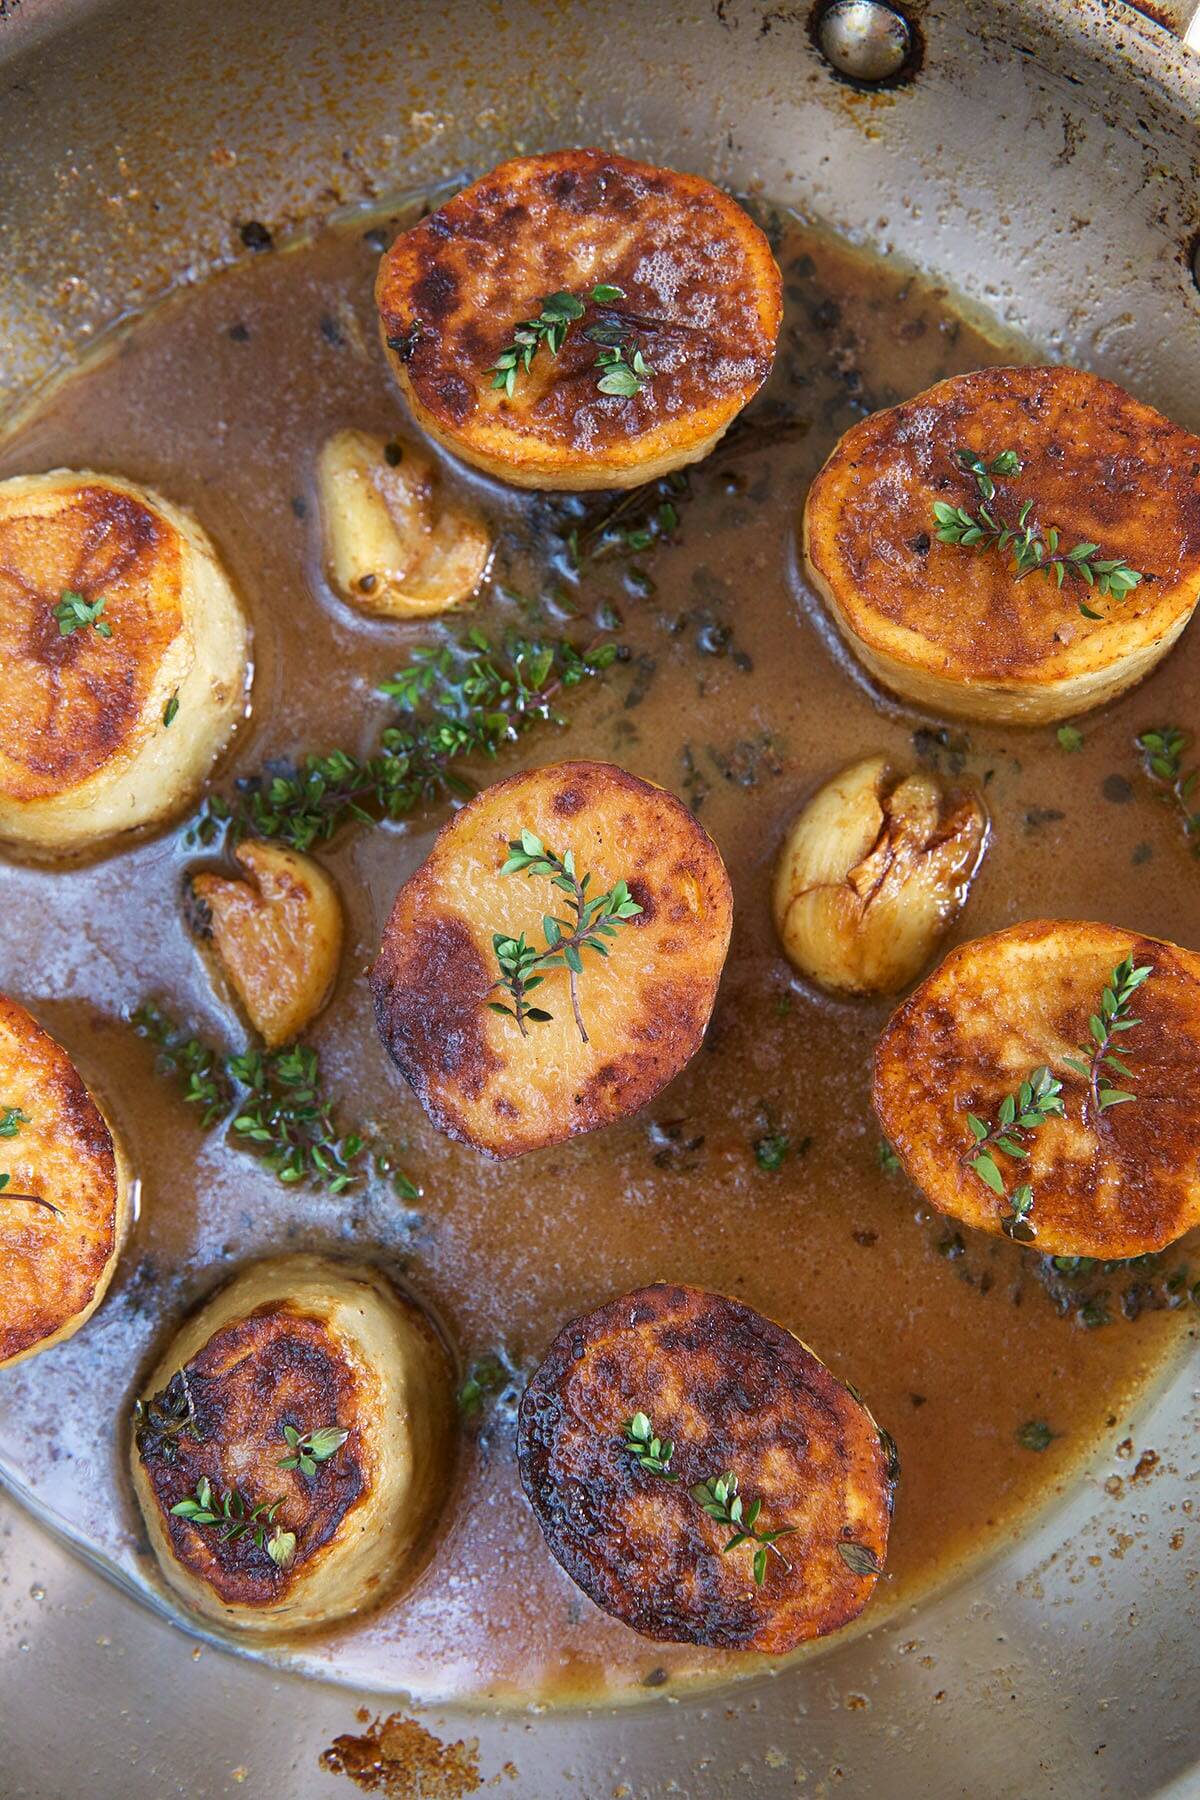 Garlic cloves are placed in between potatoes in a skillet.